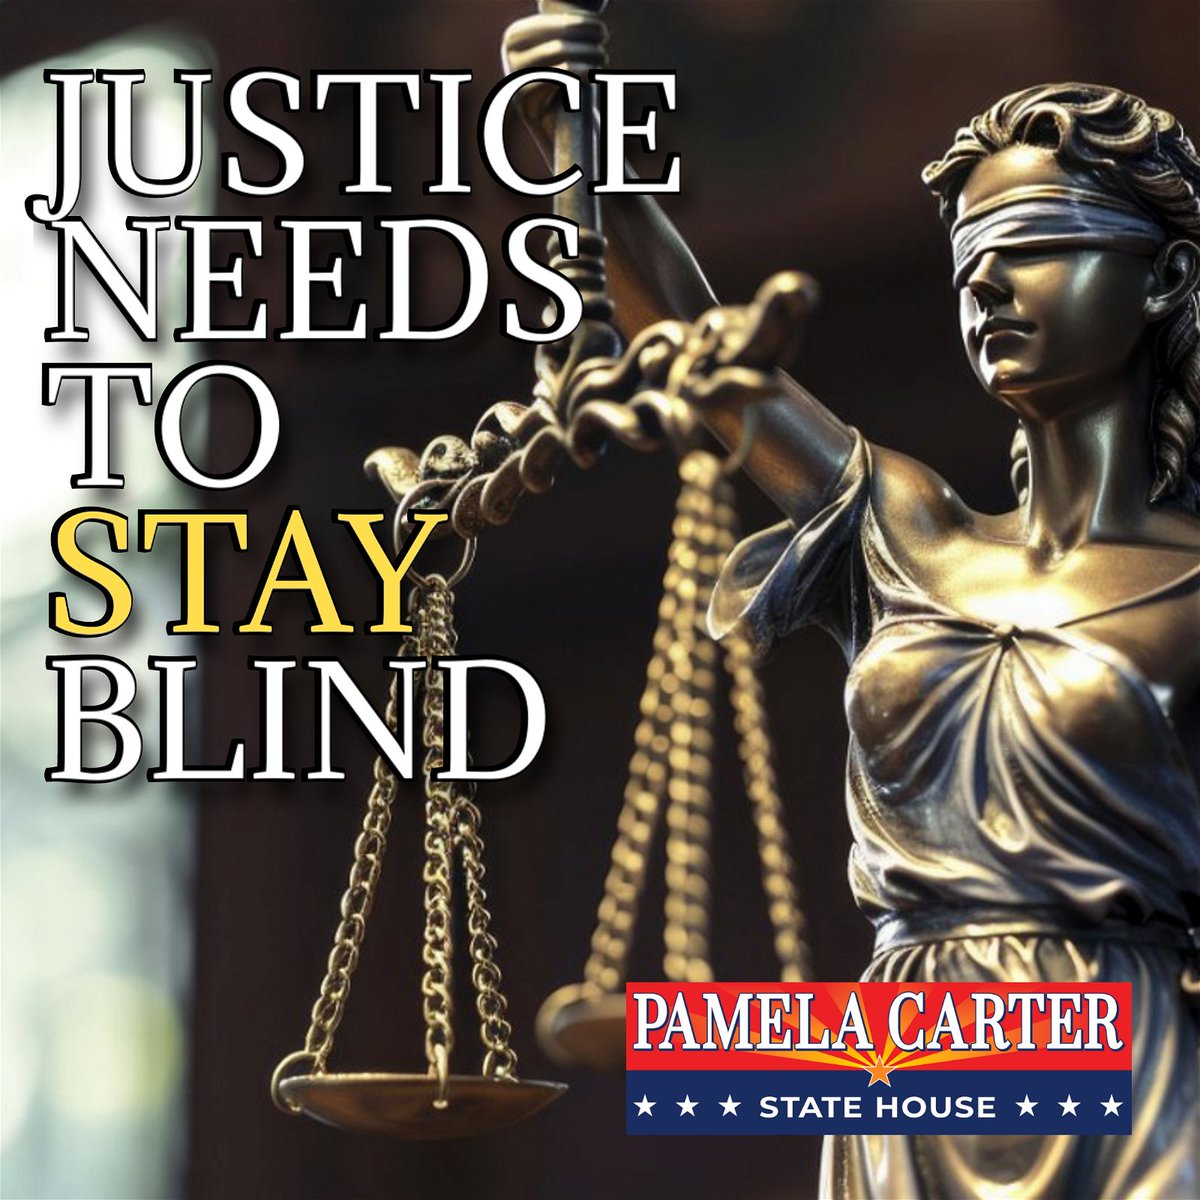 We must not allow our legal system to become a tool for political gain. Instead, our legal system should adhere to the law and not manipulate it to target political opponents. Please support me at pamelacarter.com for AZ LD4.